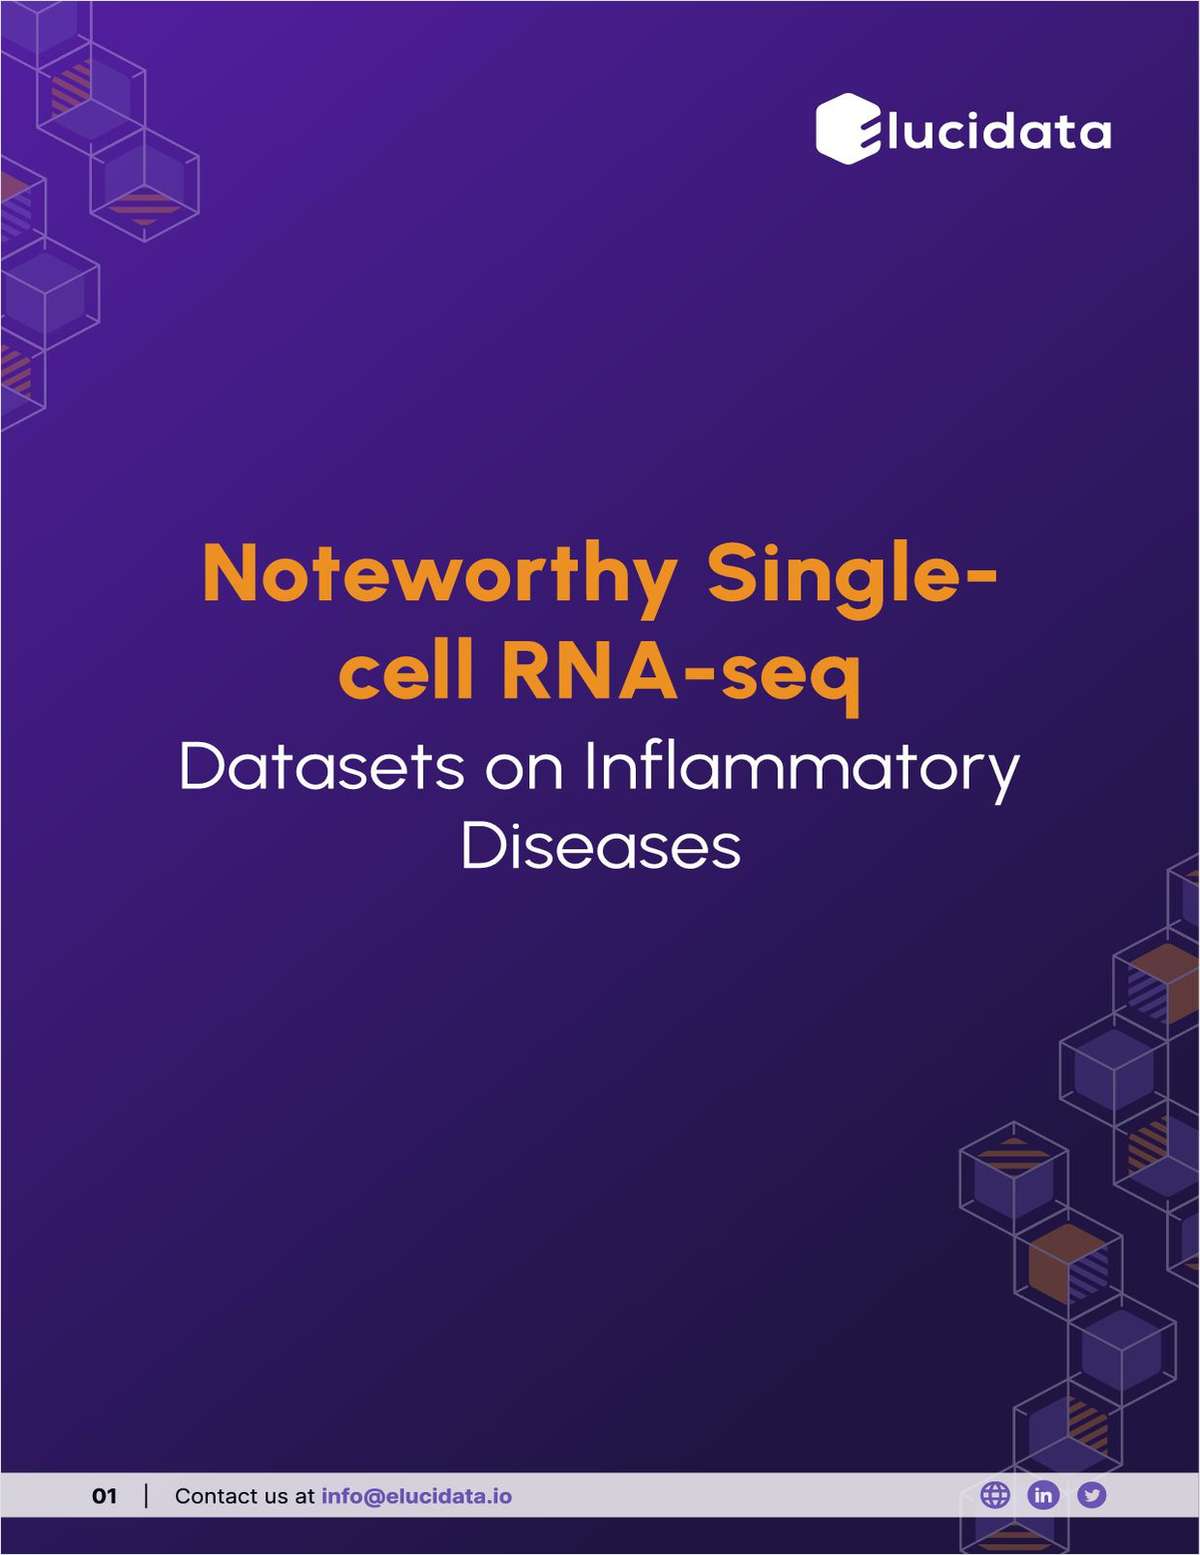 Noteworthy Single-Cell RNA-seq Datasets on Inflammatory Diseases